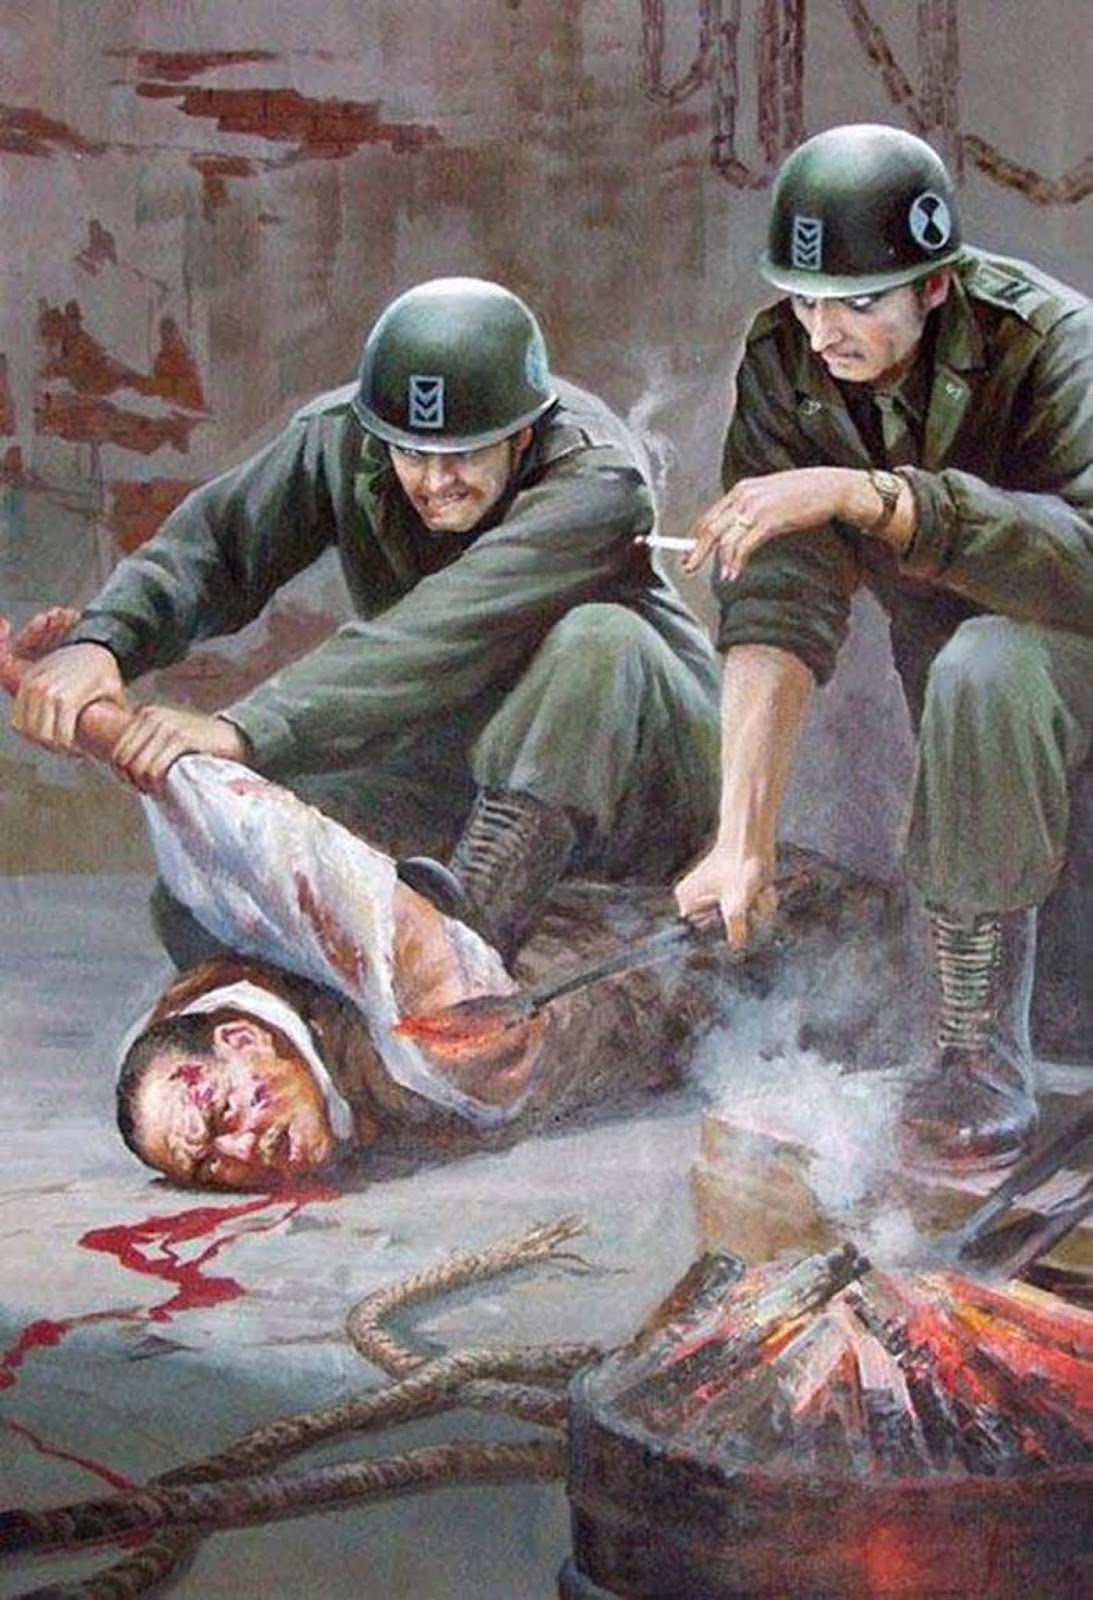 One painting shows a soldier burning the armpit of a man.